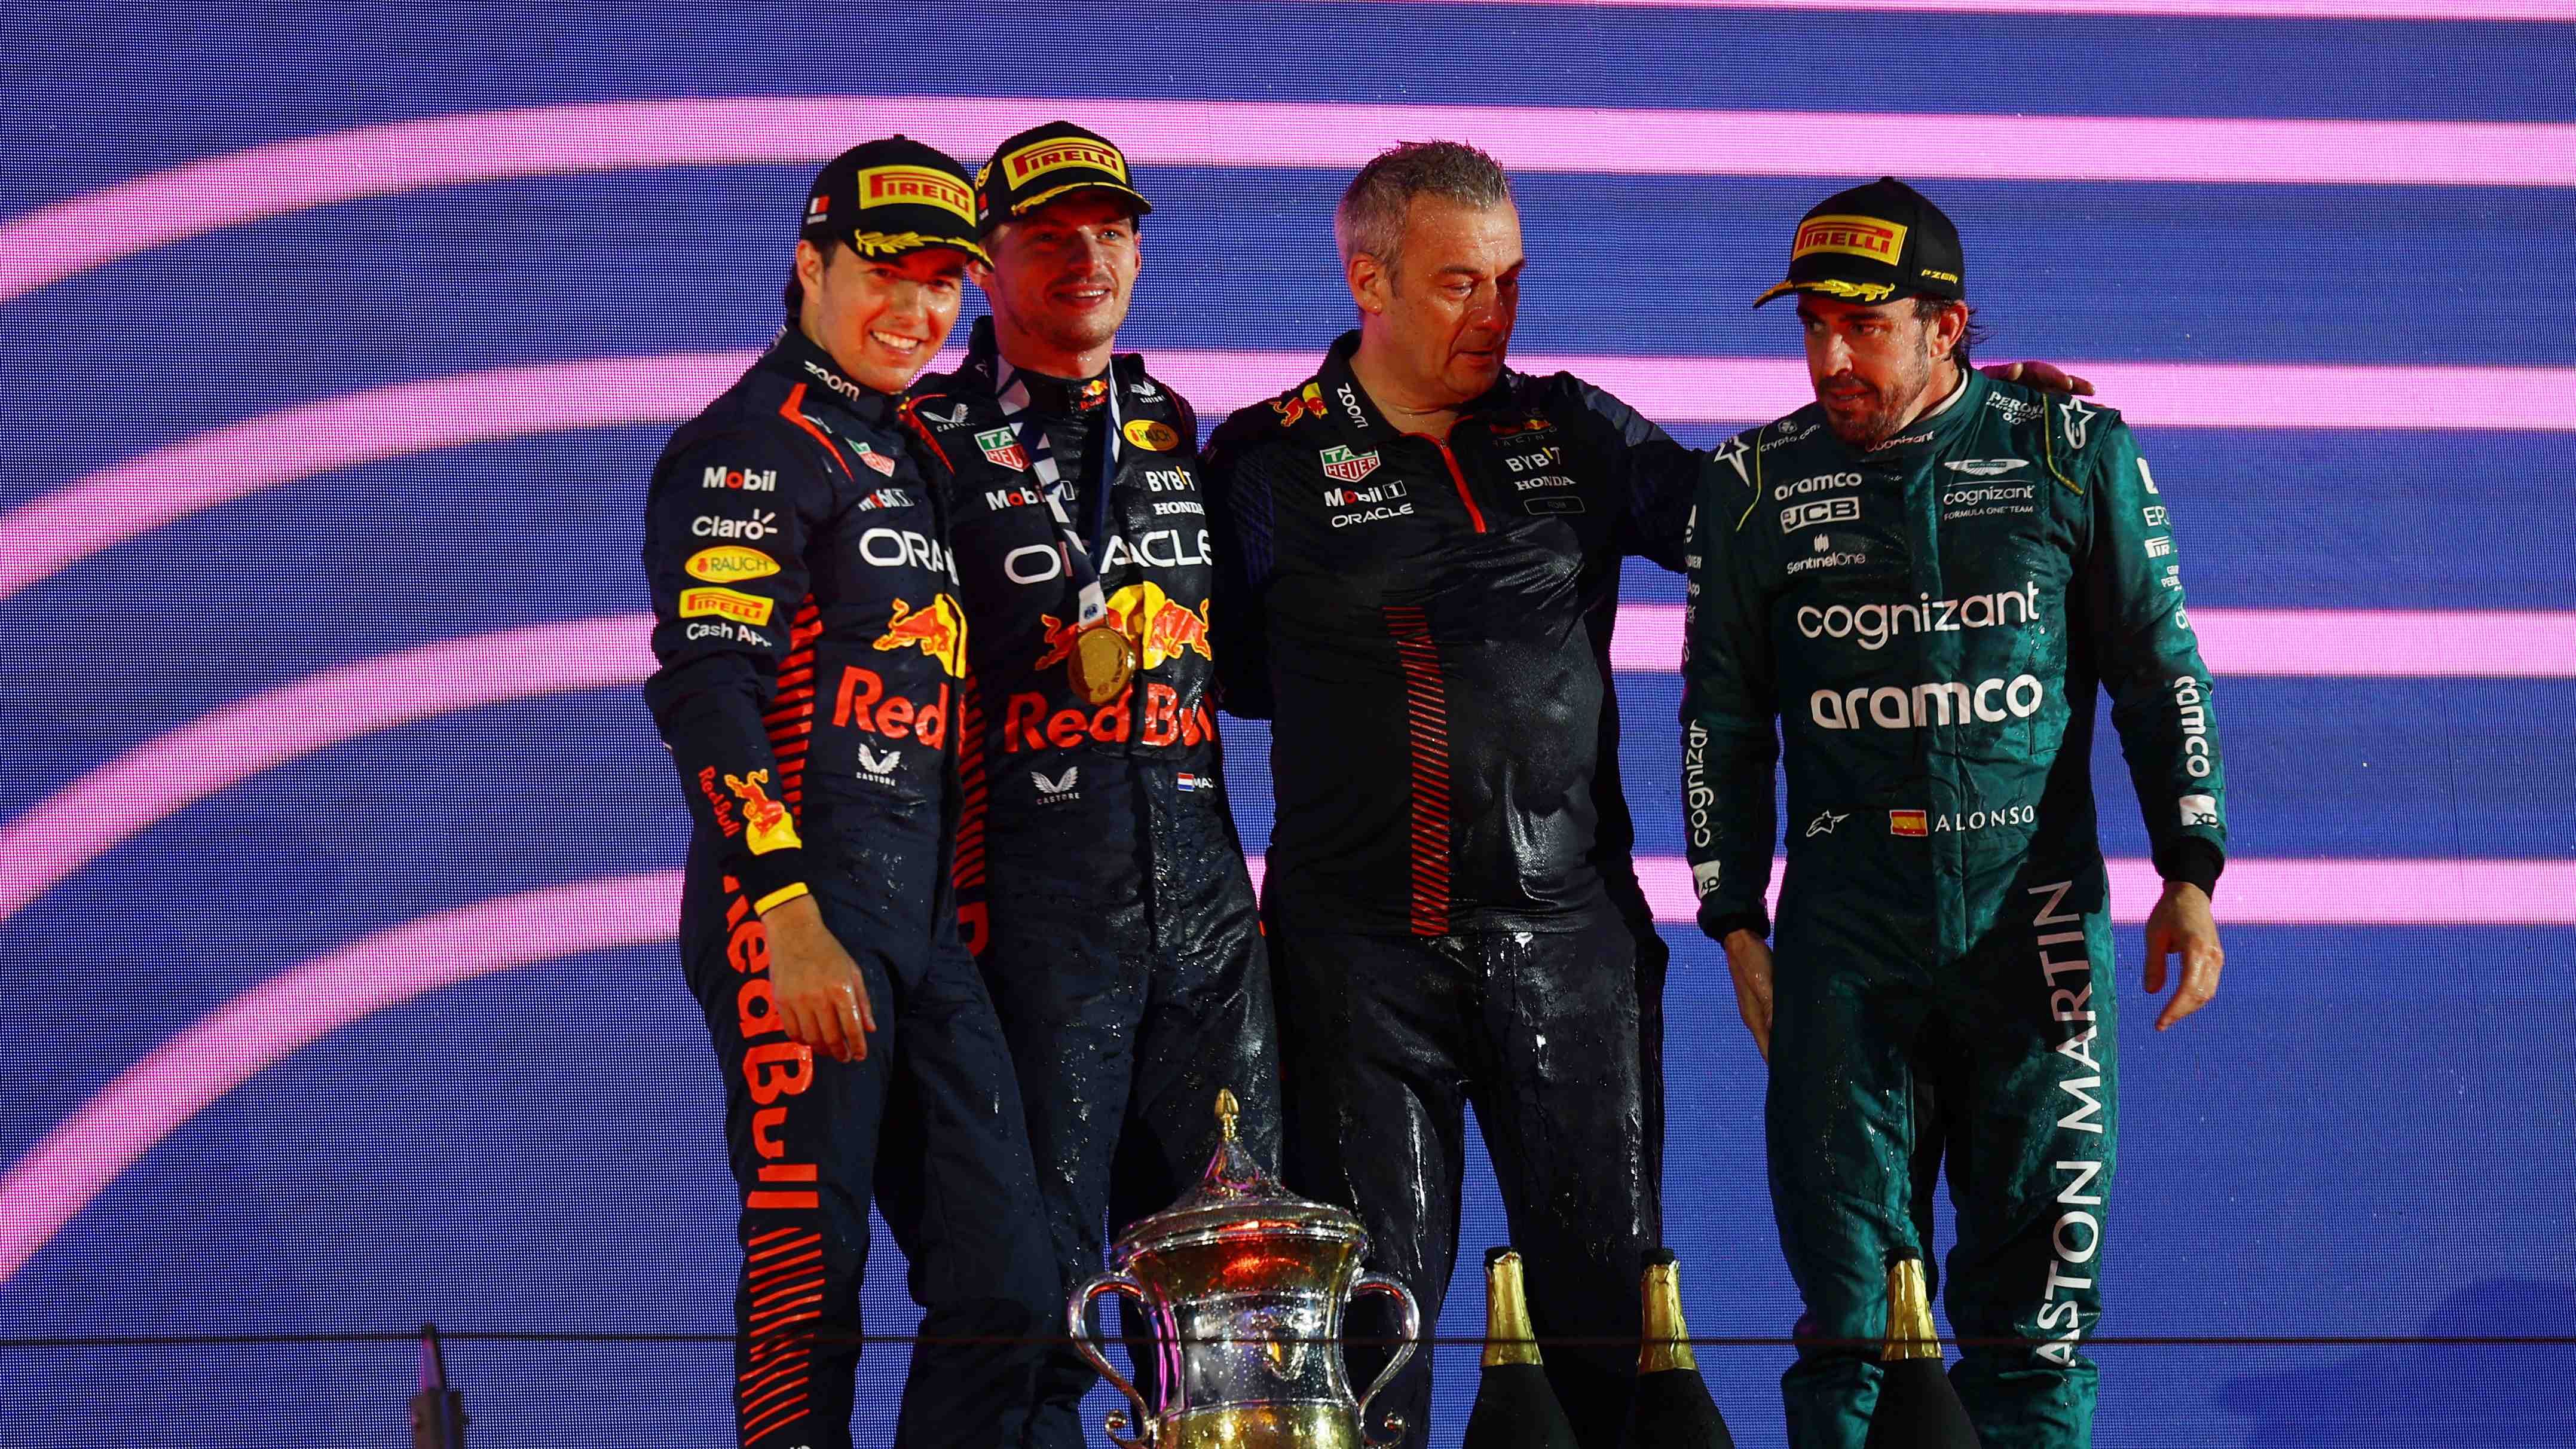 Red Bull's Max Verstappen celebrates on the podium after winning the Bahrain Grand Prix. Credit: Reuters Photo